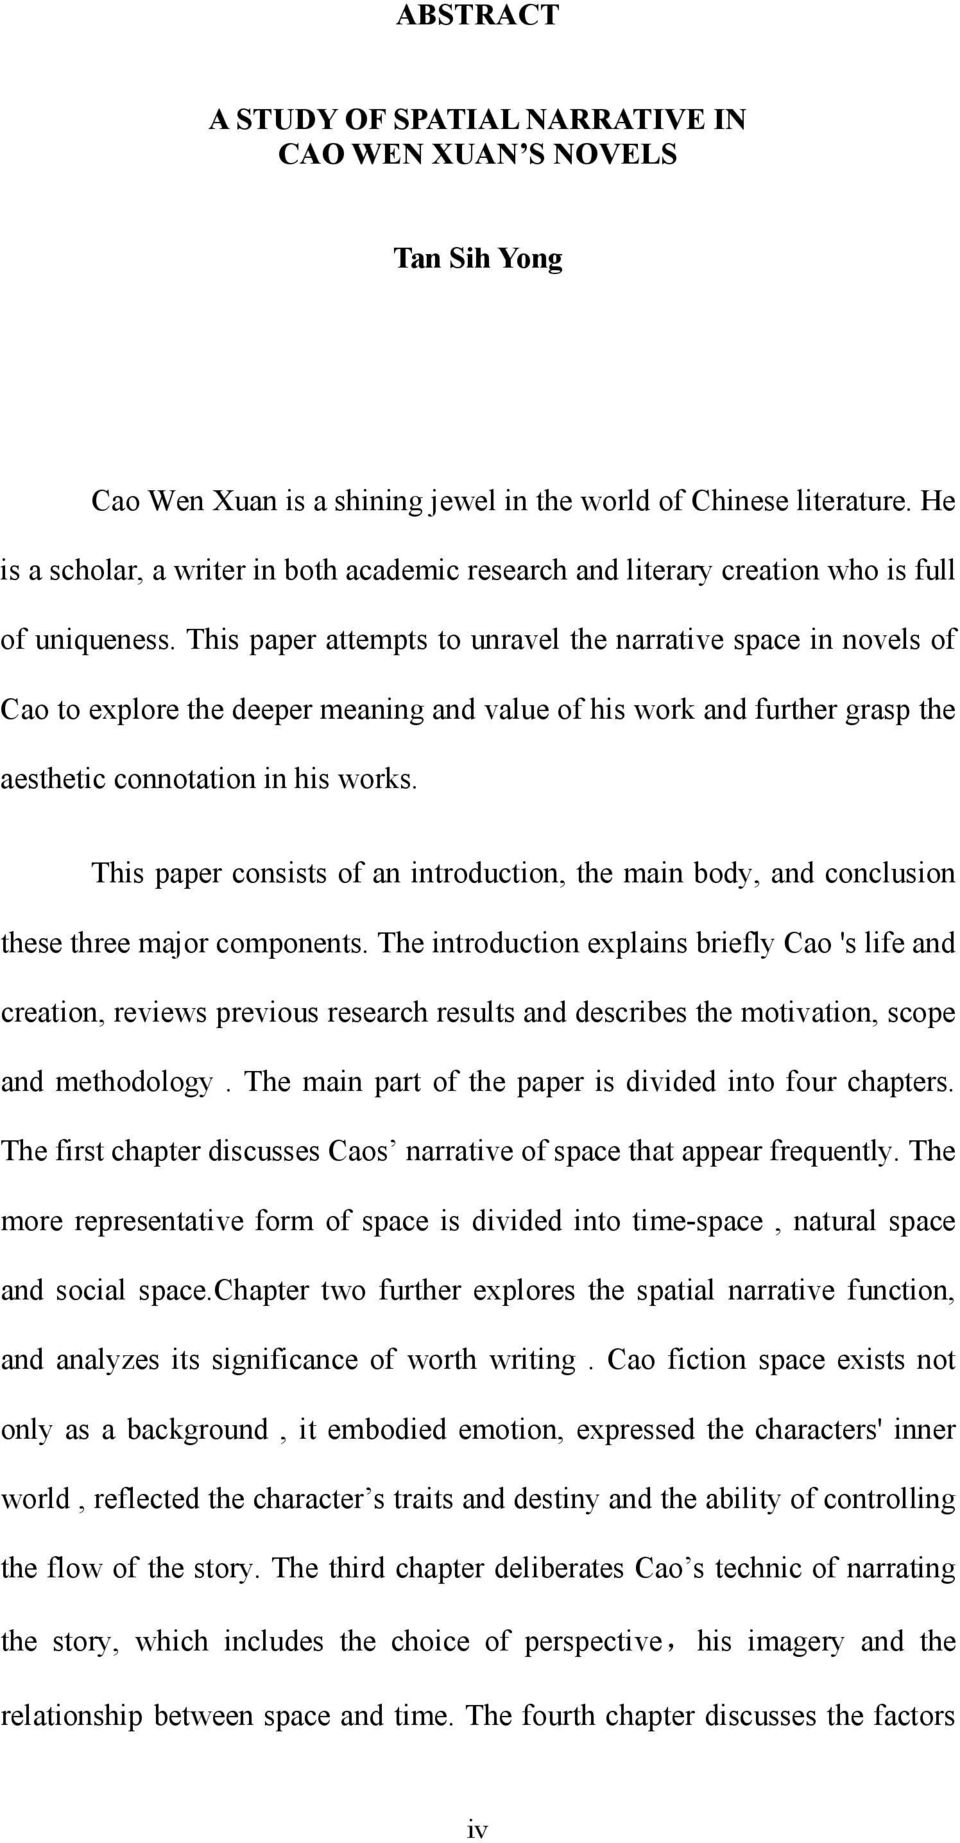 This paper attempts to unravel the narrative space in novels of Cao to explore the deeper meaning and value of his work and further grasp the aesthetic connotation in his works.